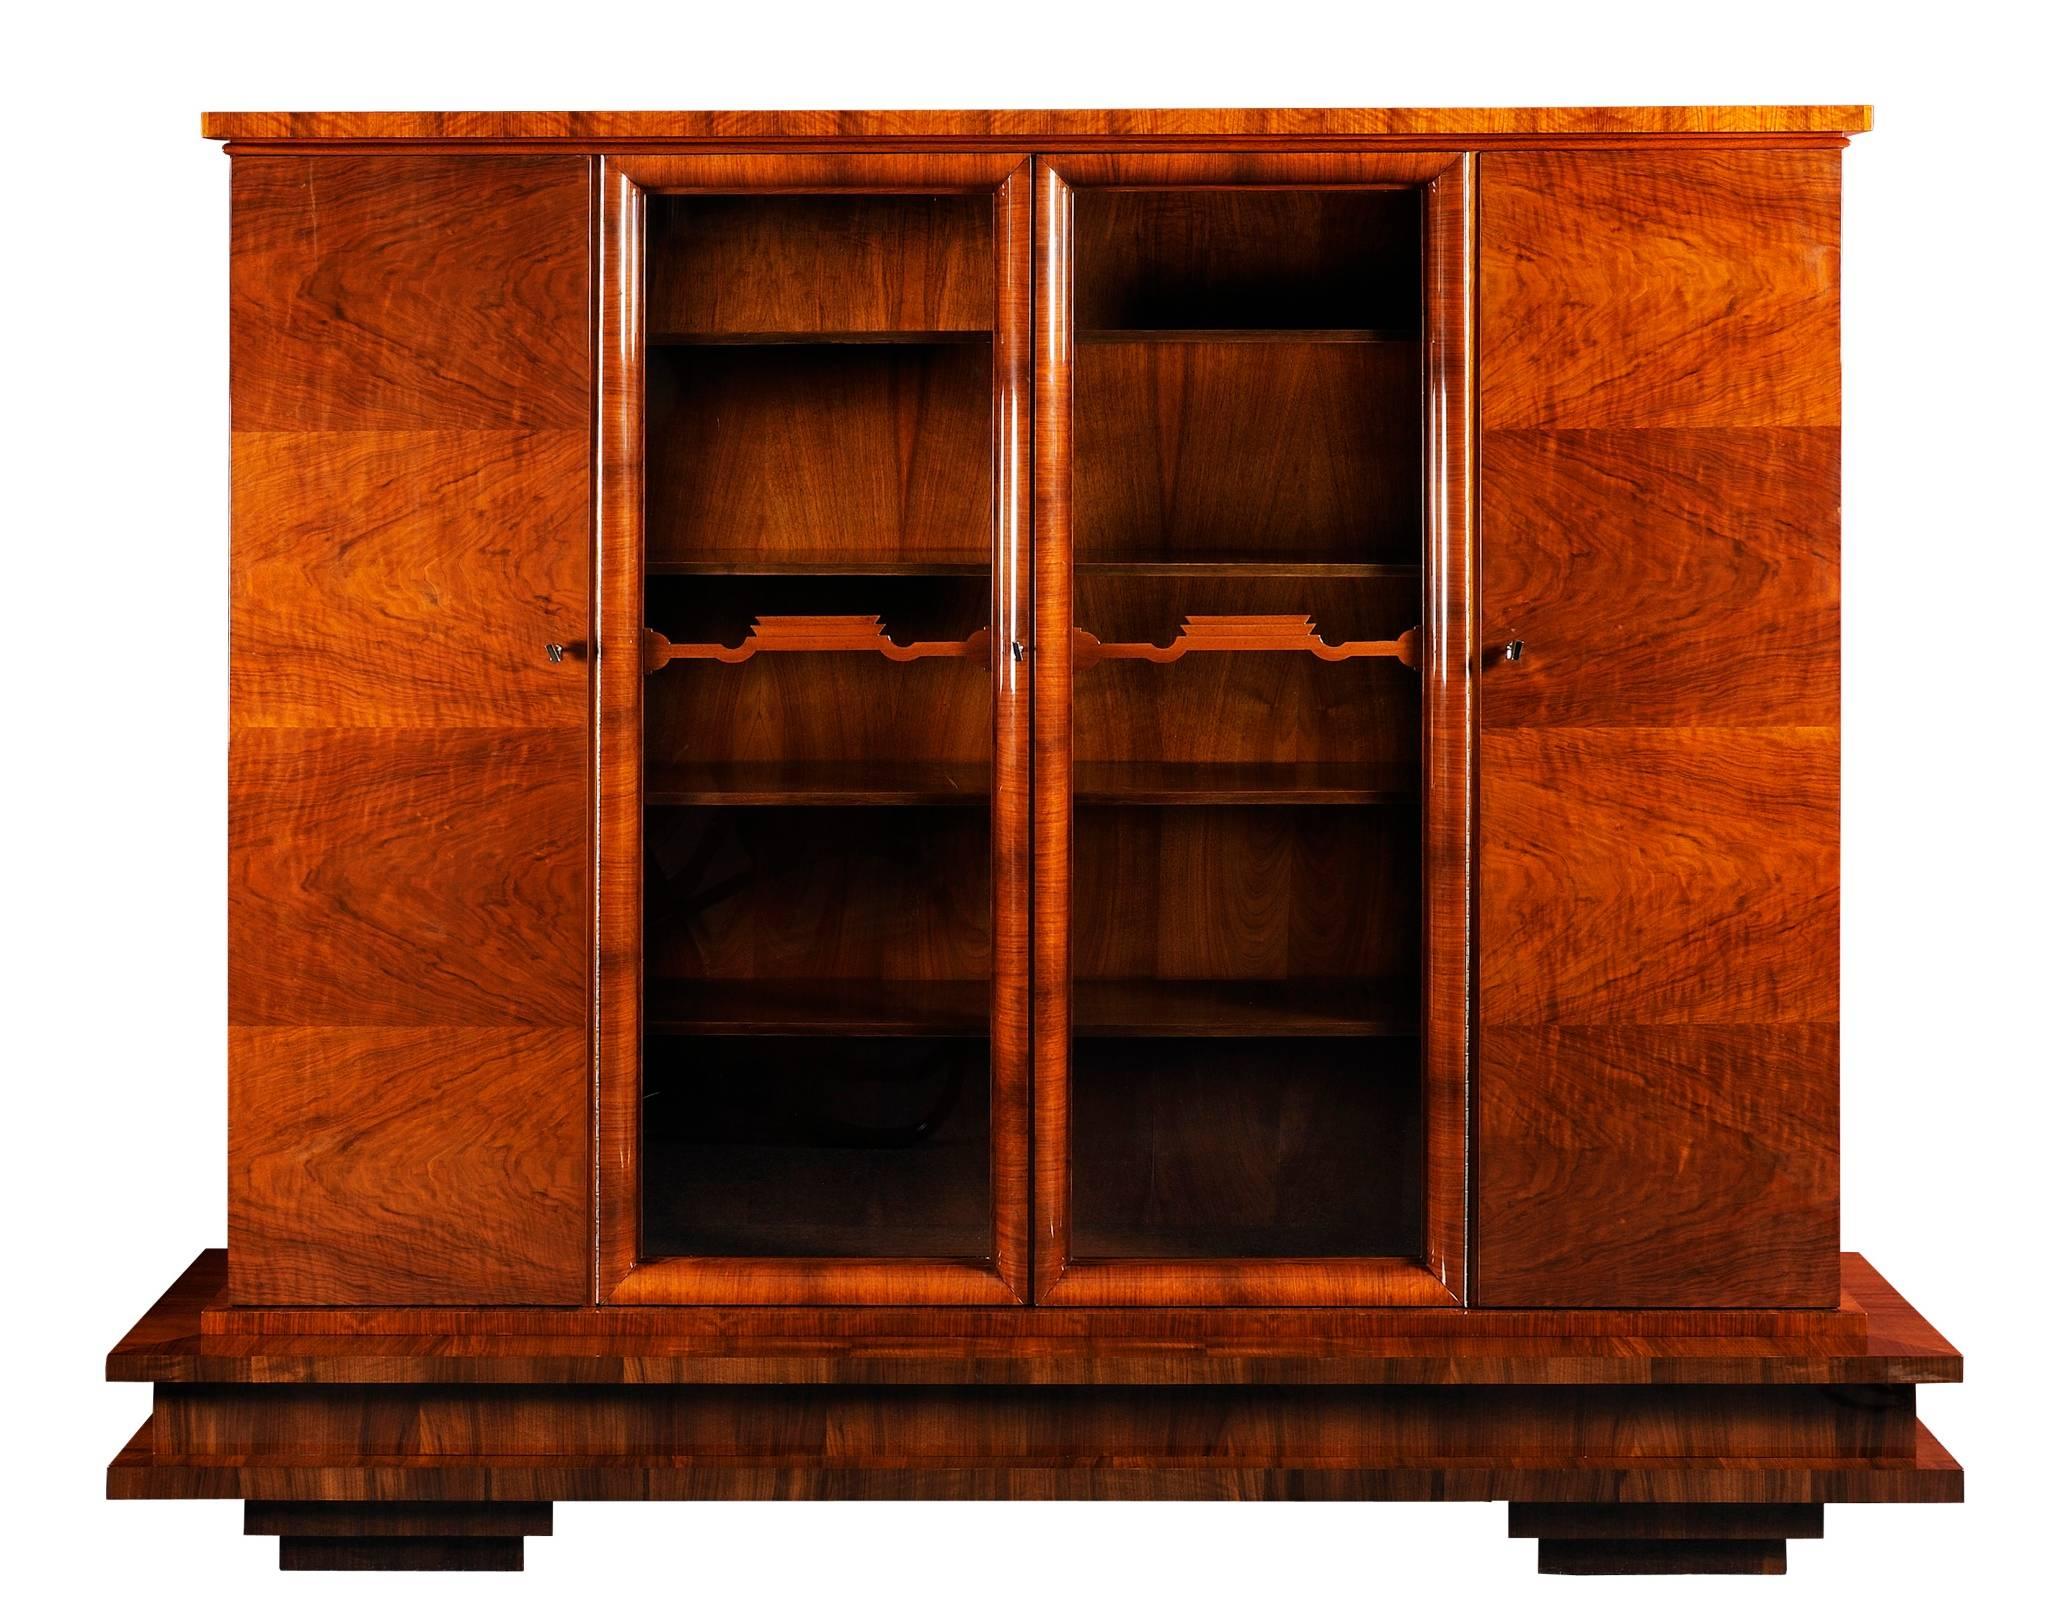 20th century Art Deco bookcases.
Completely restored to the high gloss.
Material: Walnut.

We guarantee safe a the cheapest air transport from Europe to the whole world within 7 days.
The price is the same as for ship transport but delivery time is